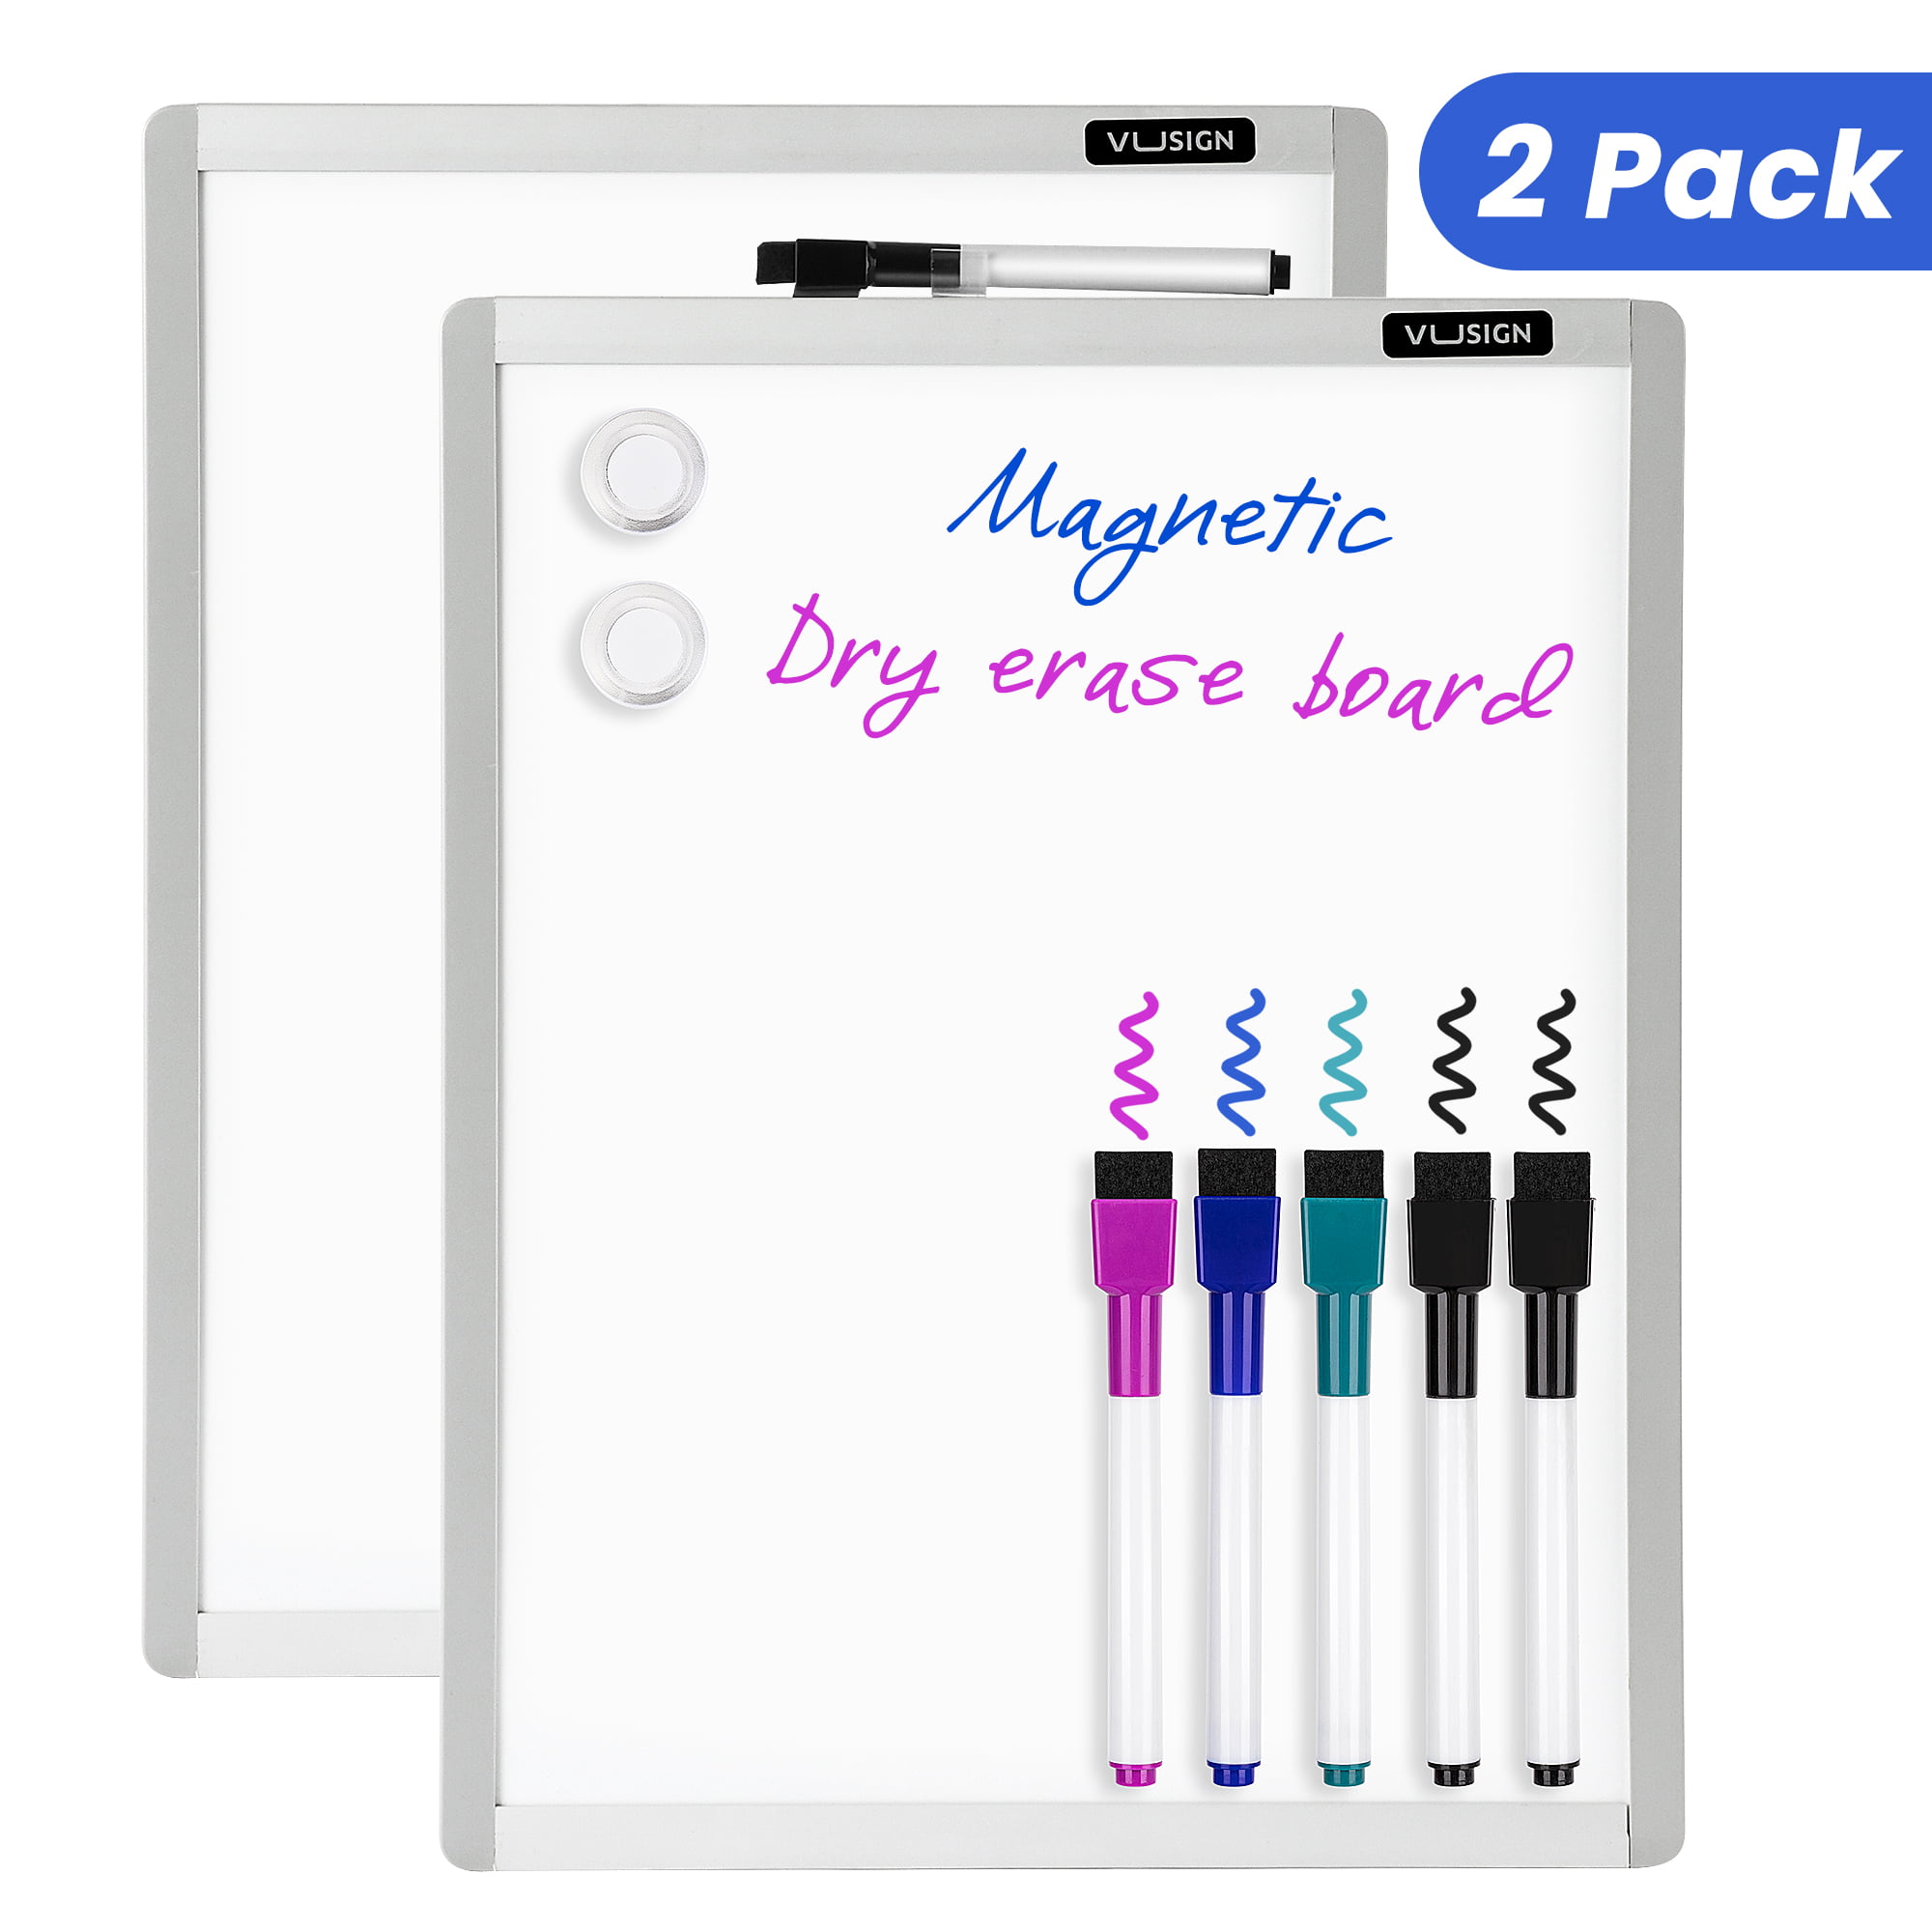 Classroom 4 x Magnets and 2 Erasers for Students Double Sided Dry Erase Board Fridge Including 2 x Lap Board Ohuhu 2 Pack 9 x 12 Magnetic Whiteboards Kids 6 x Markers Blue & Pink 